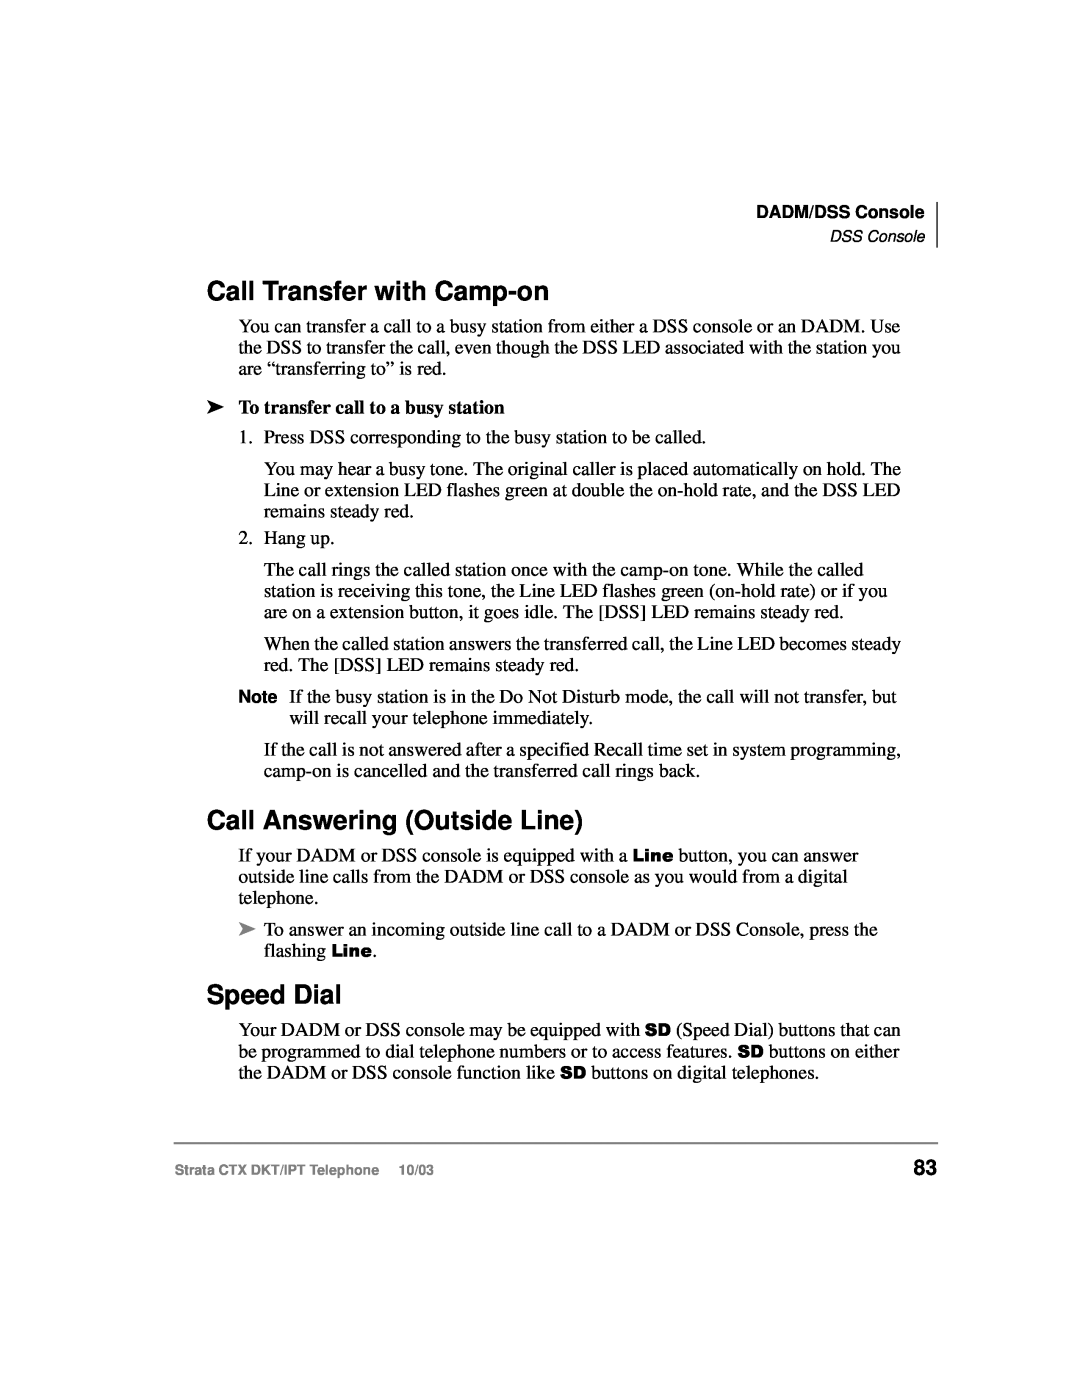 Toshiba DKT, IPT Call Transfer with Camp-on, Call Answering Outside Line, Speed Dial, To transfer call to a busy station 